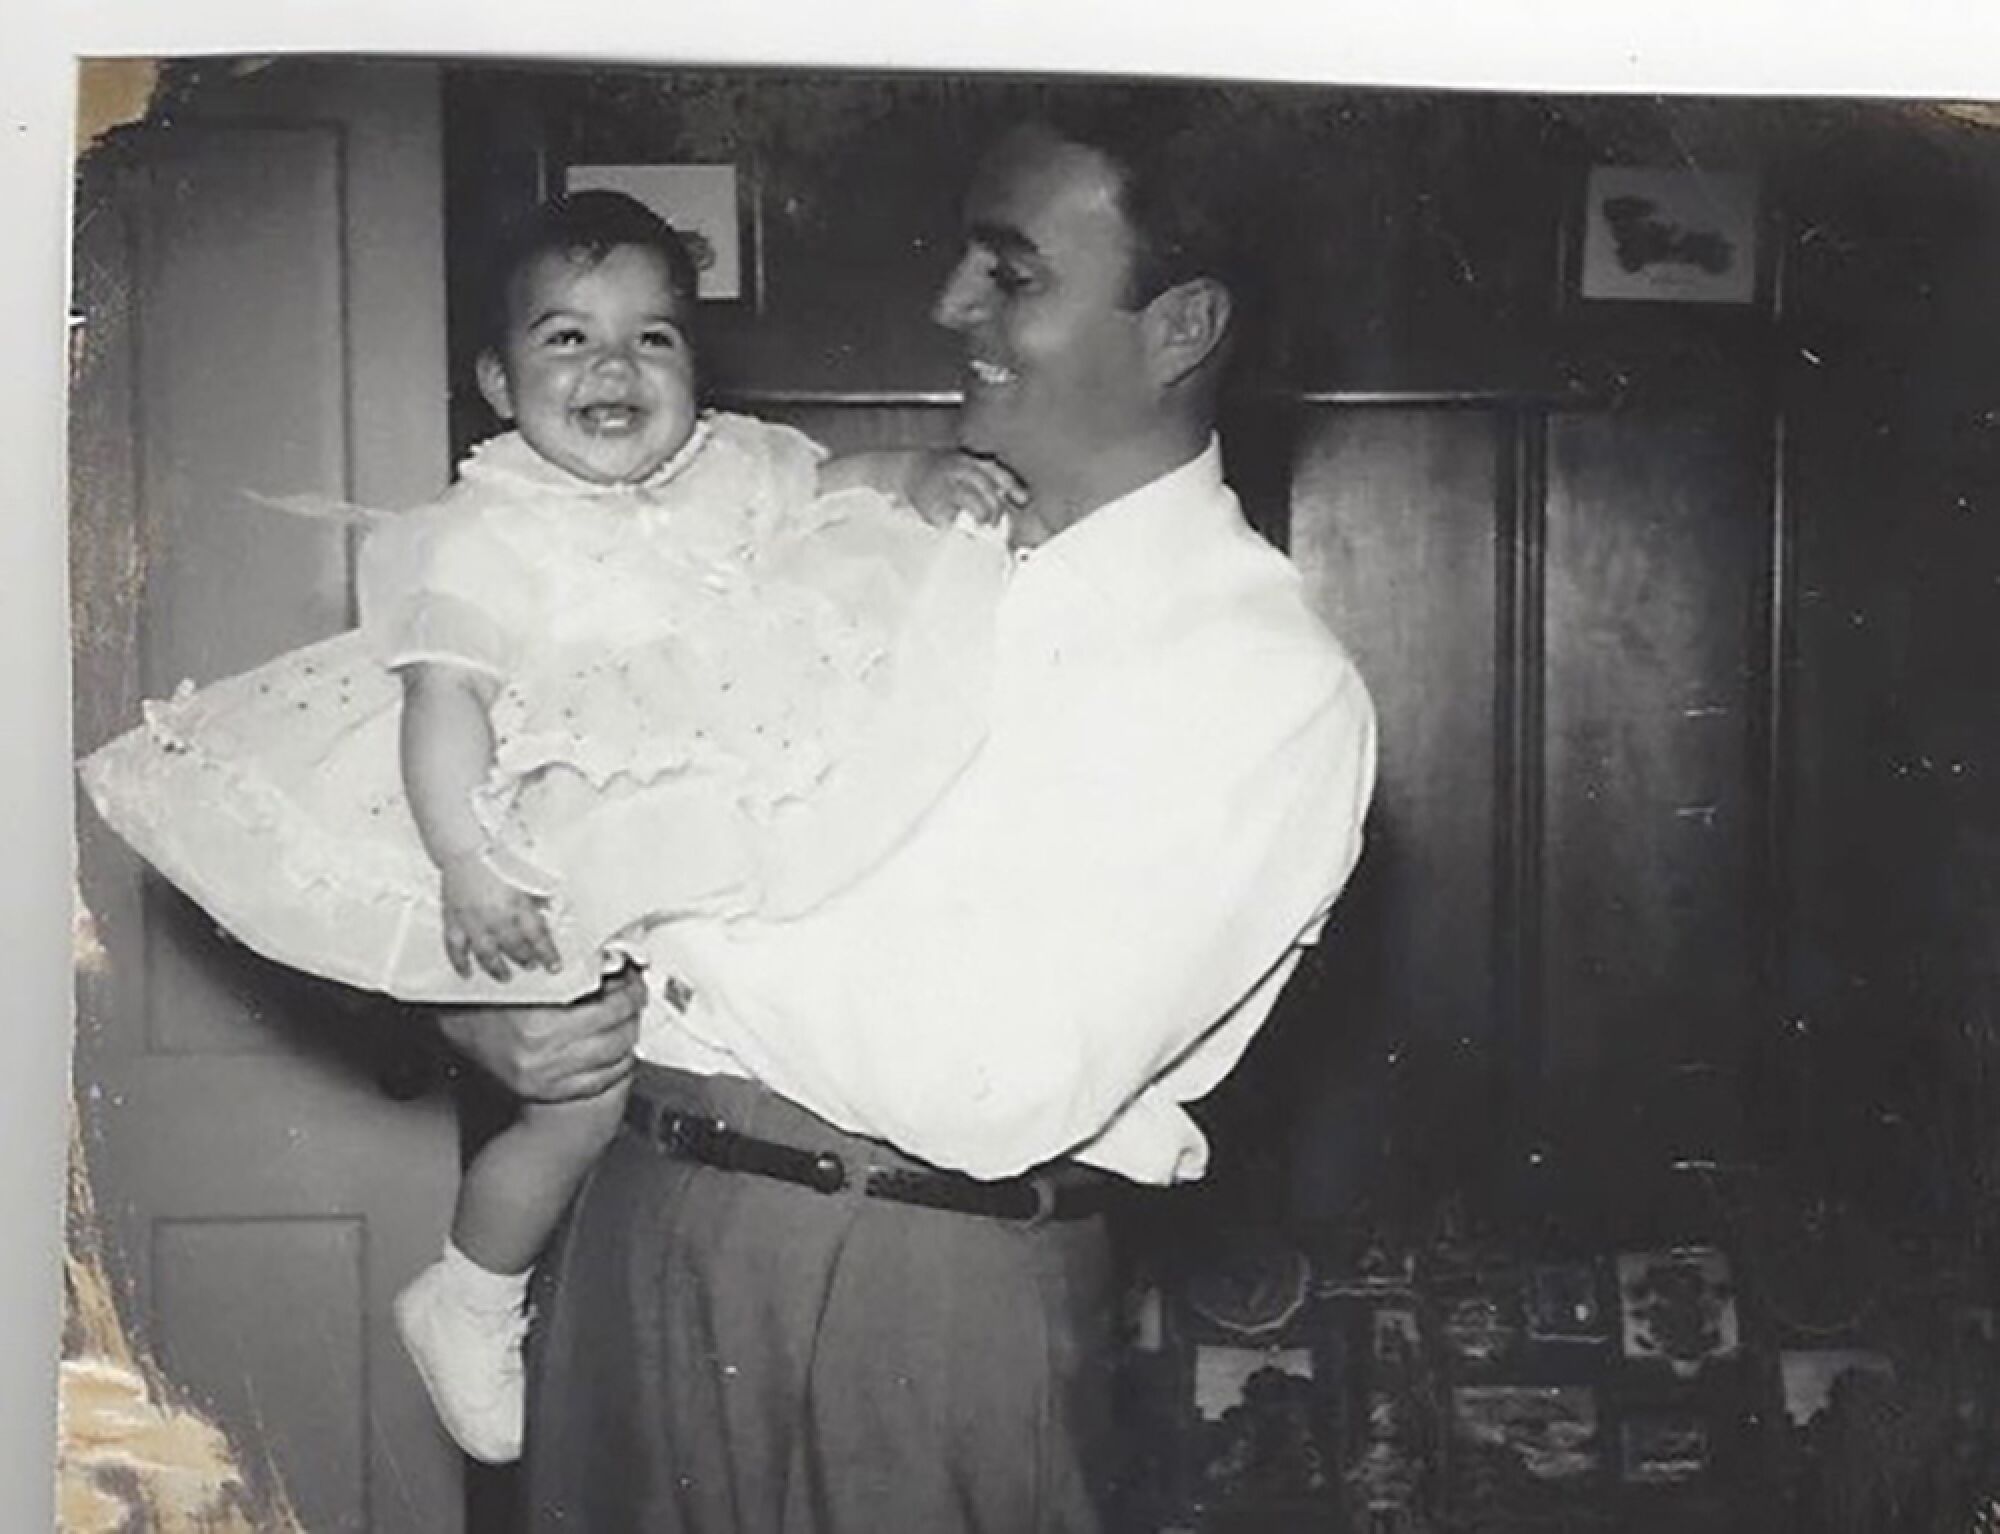 Hank Caruso holds his daughter Christina Caruso in the early 1960s inside their home. 